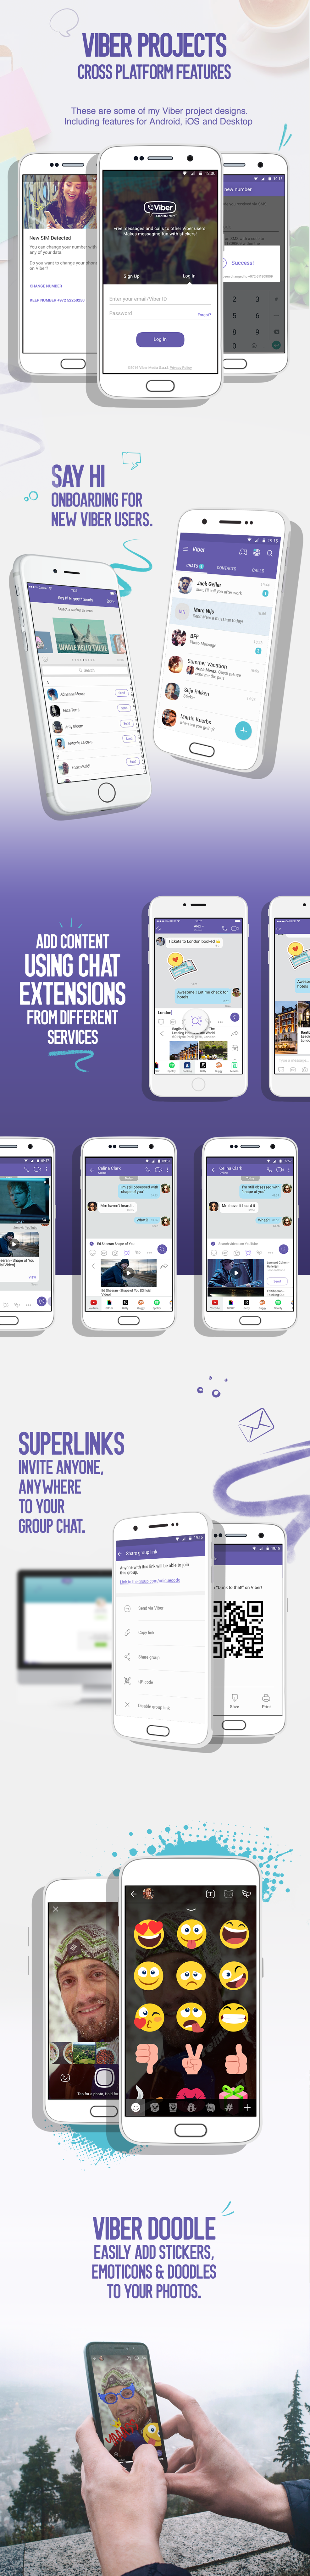 Viber-android-Strip01